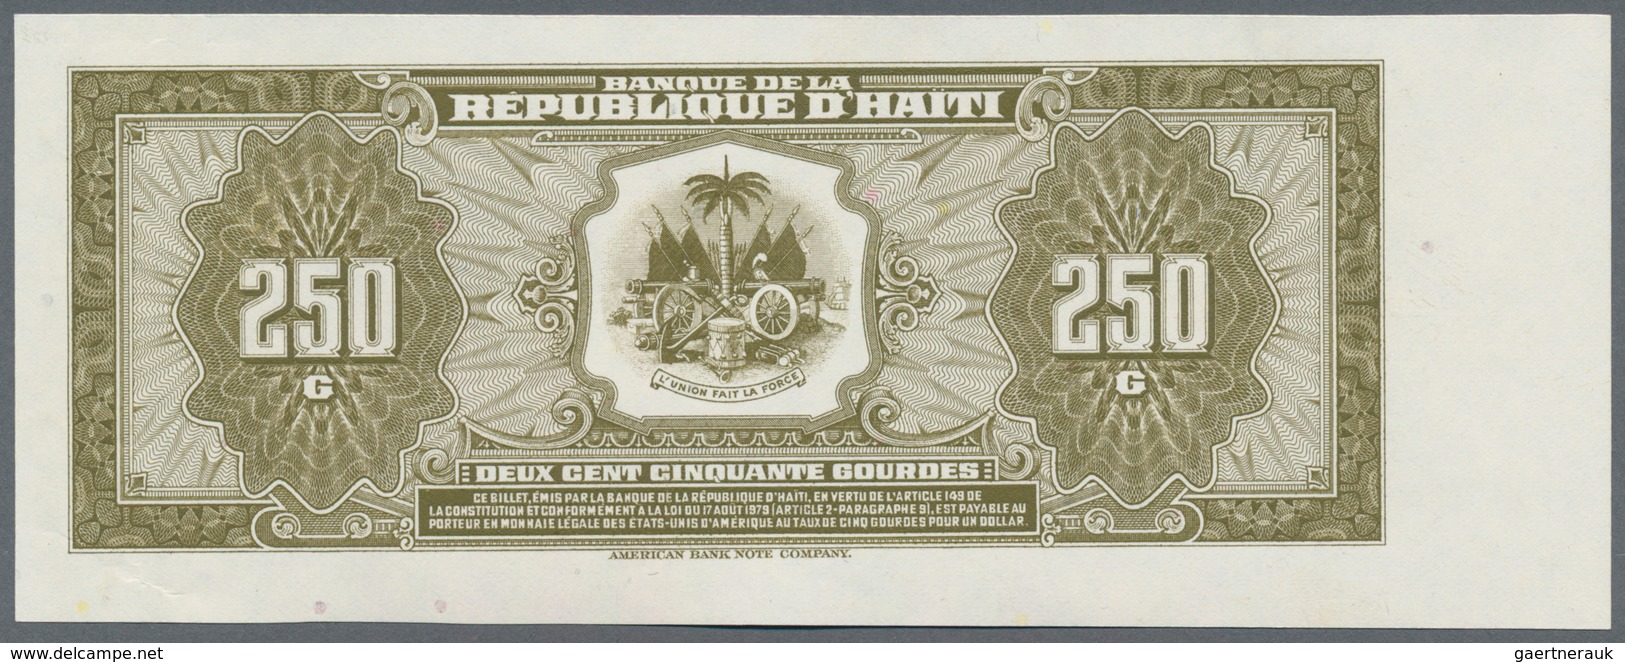 Alle Welt: Very interesting set with 14 banknotes containing Belgian Congo 100 Francs 1957 P.33b in